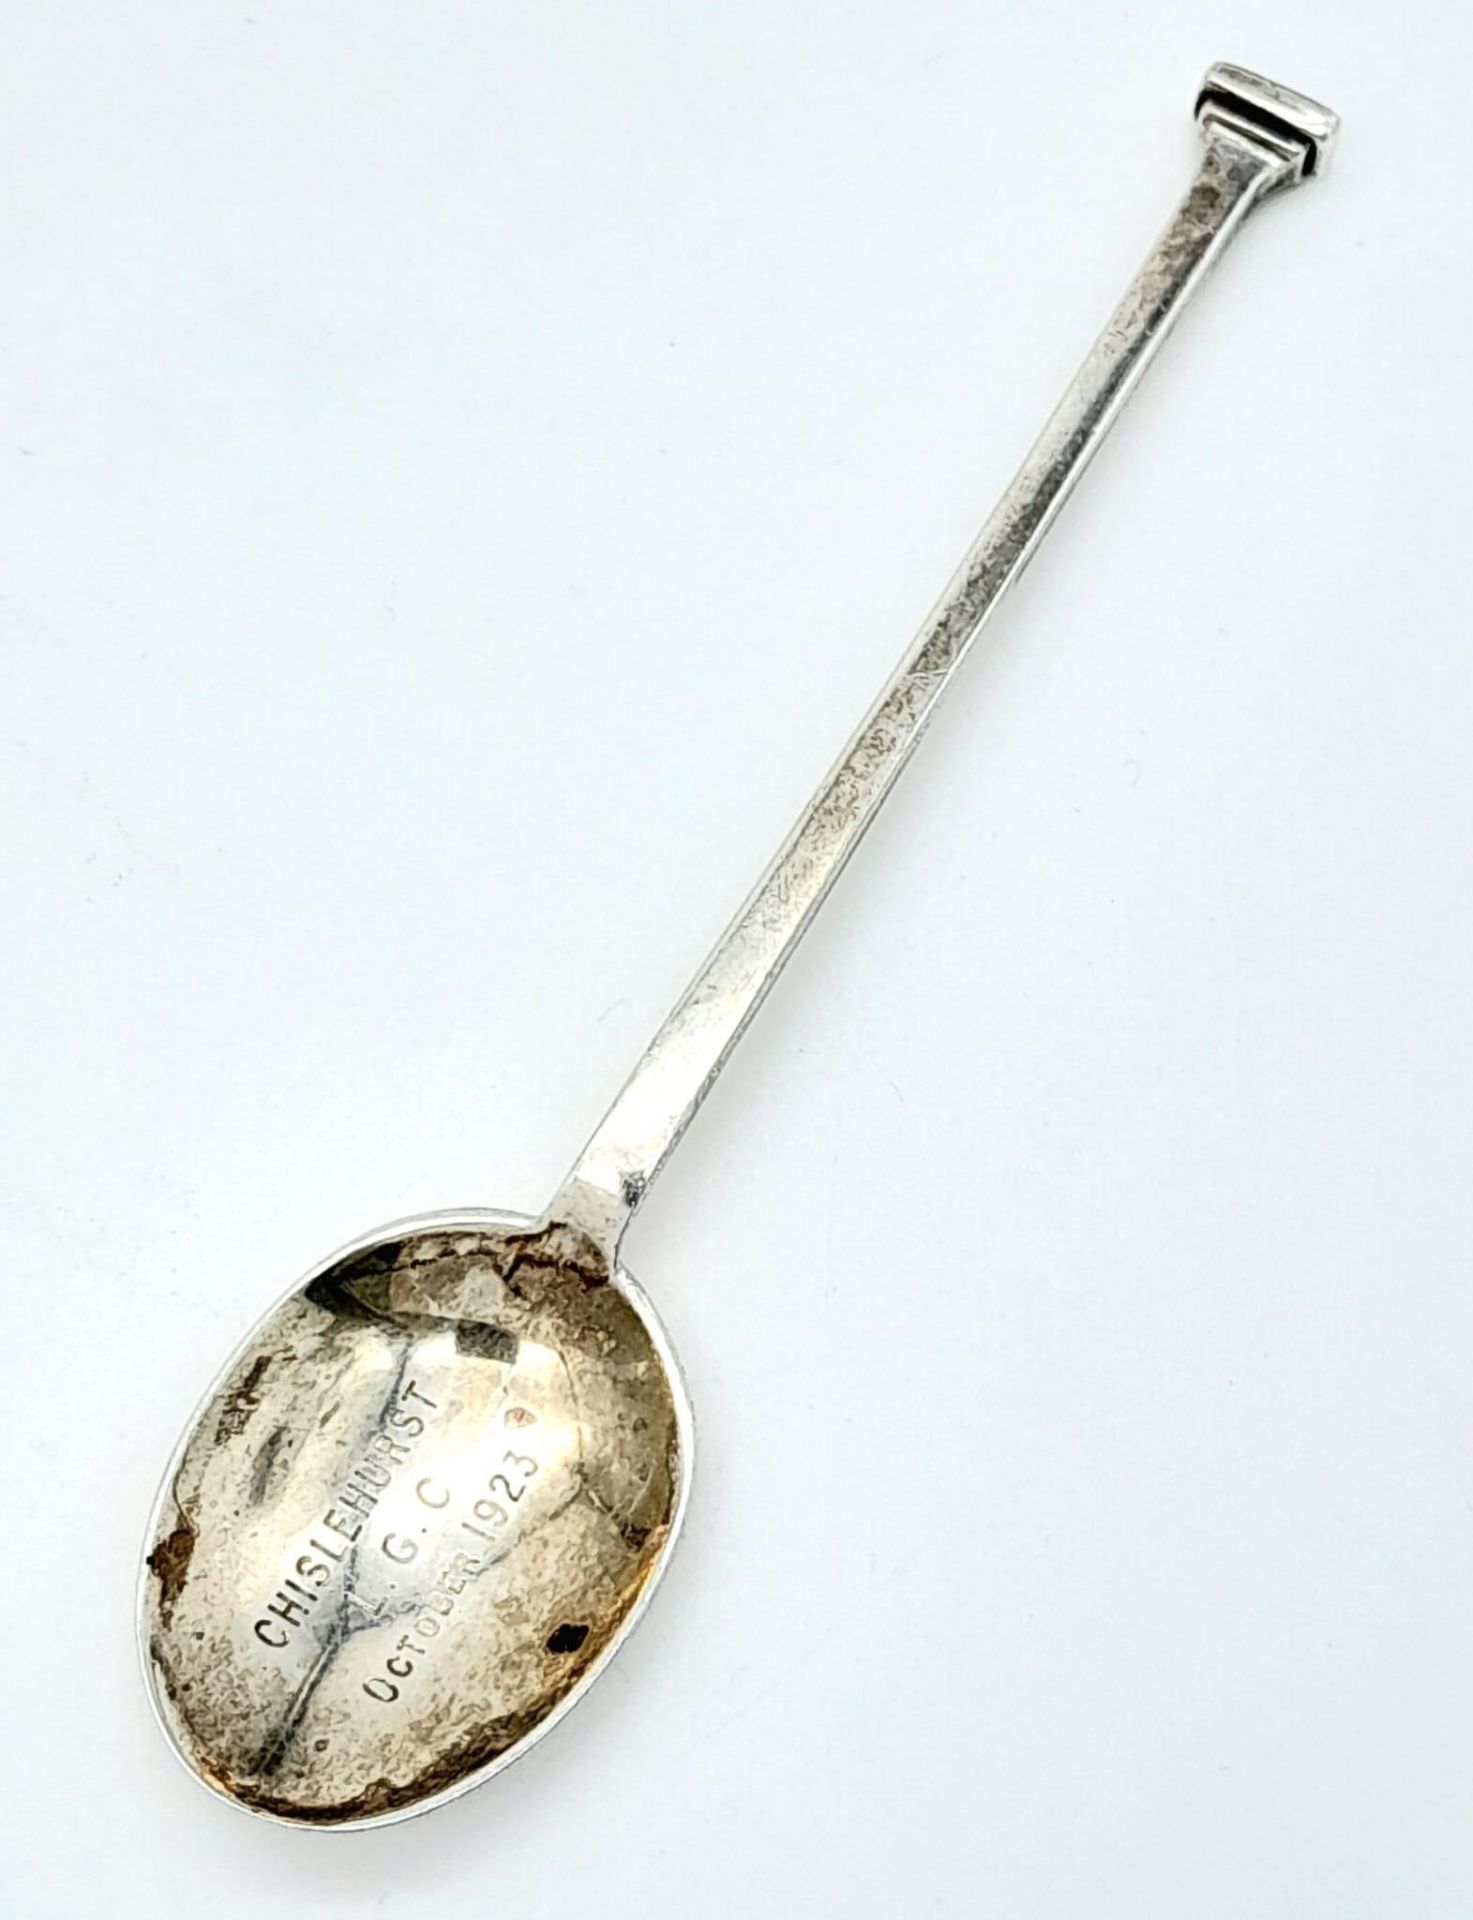 An antique sterling silver commemorative spoon with full London hallmarks, 1921. Total weight 12.8G.